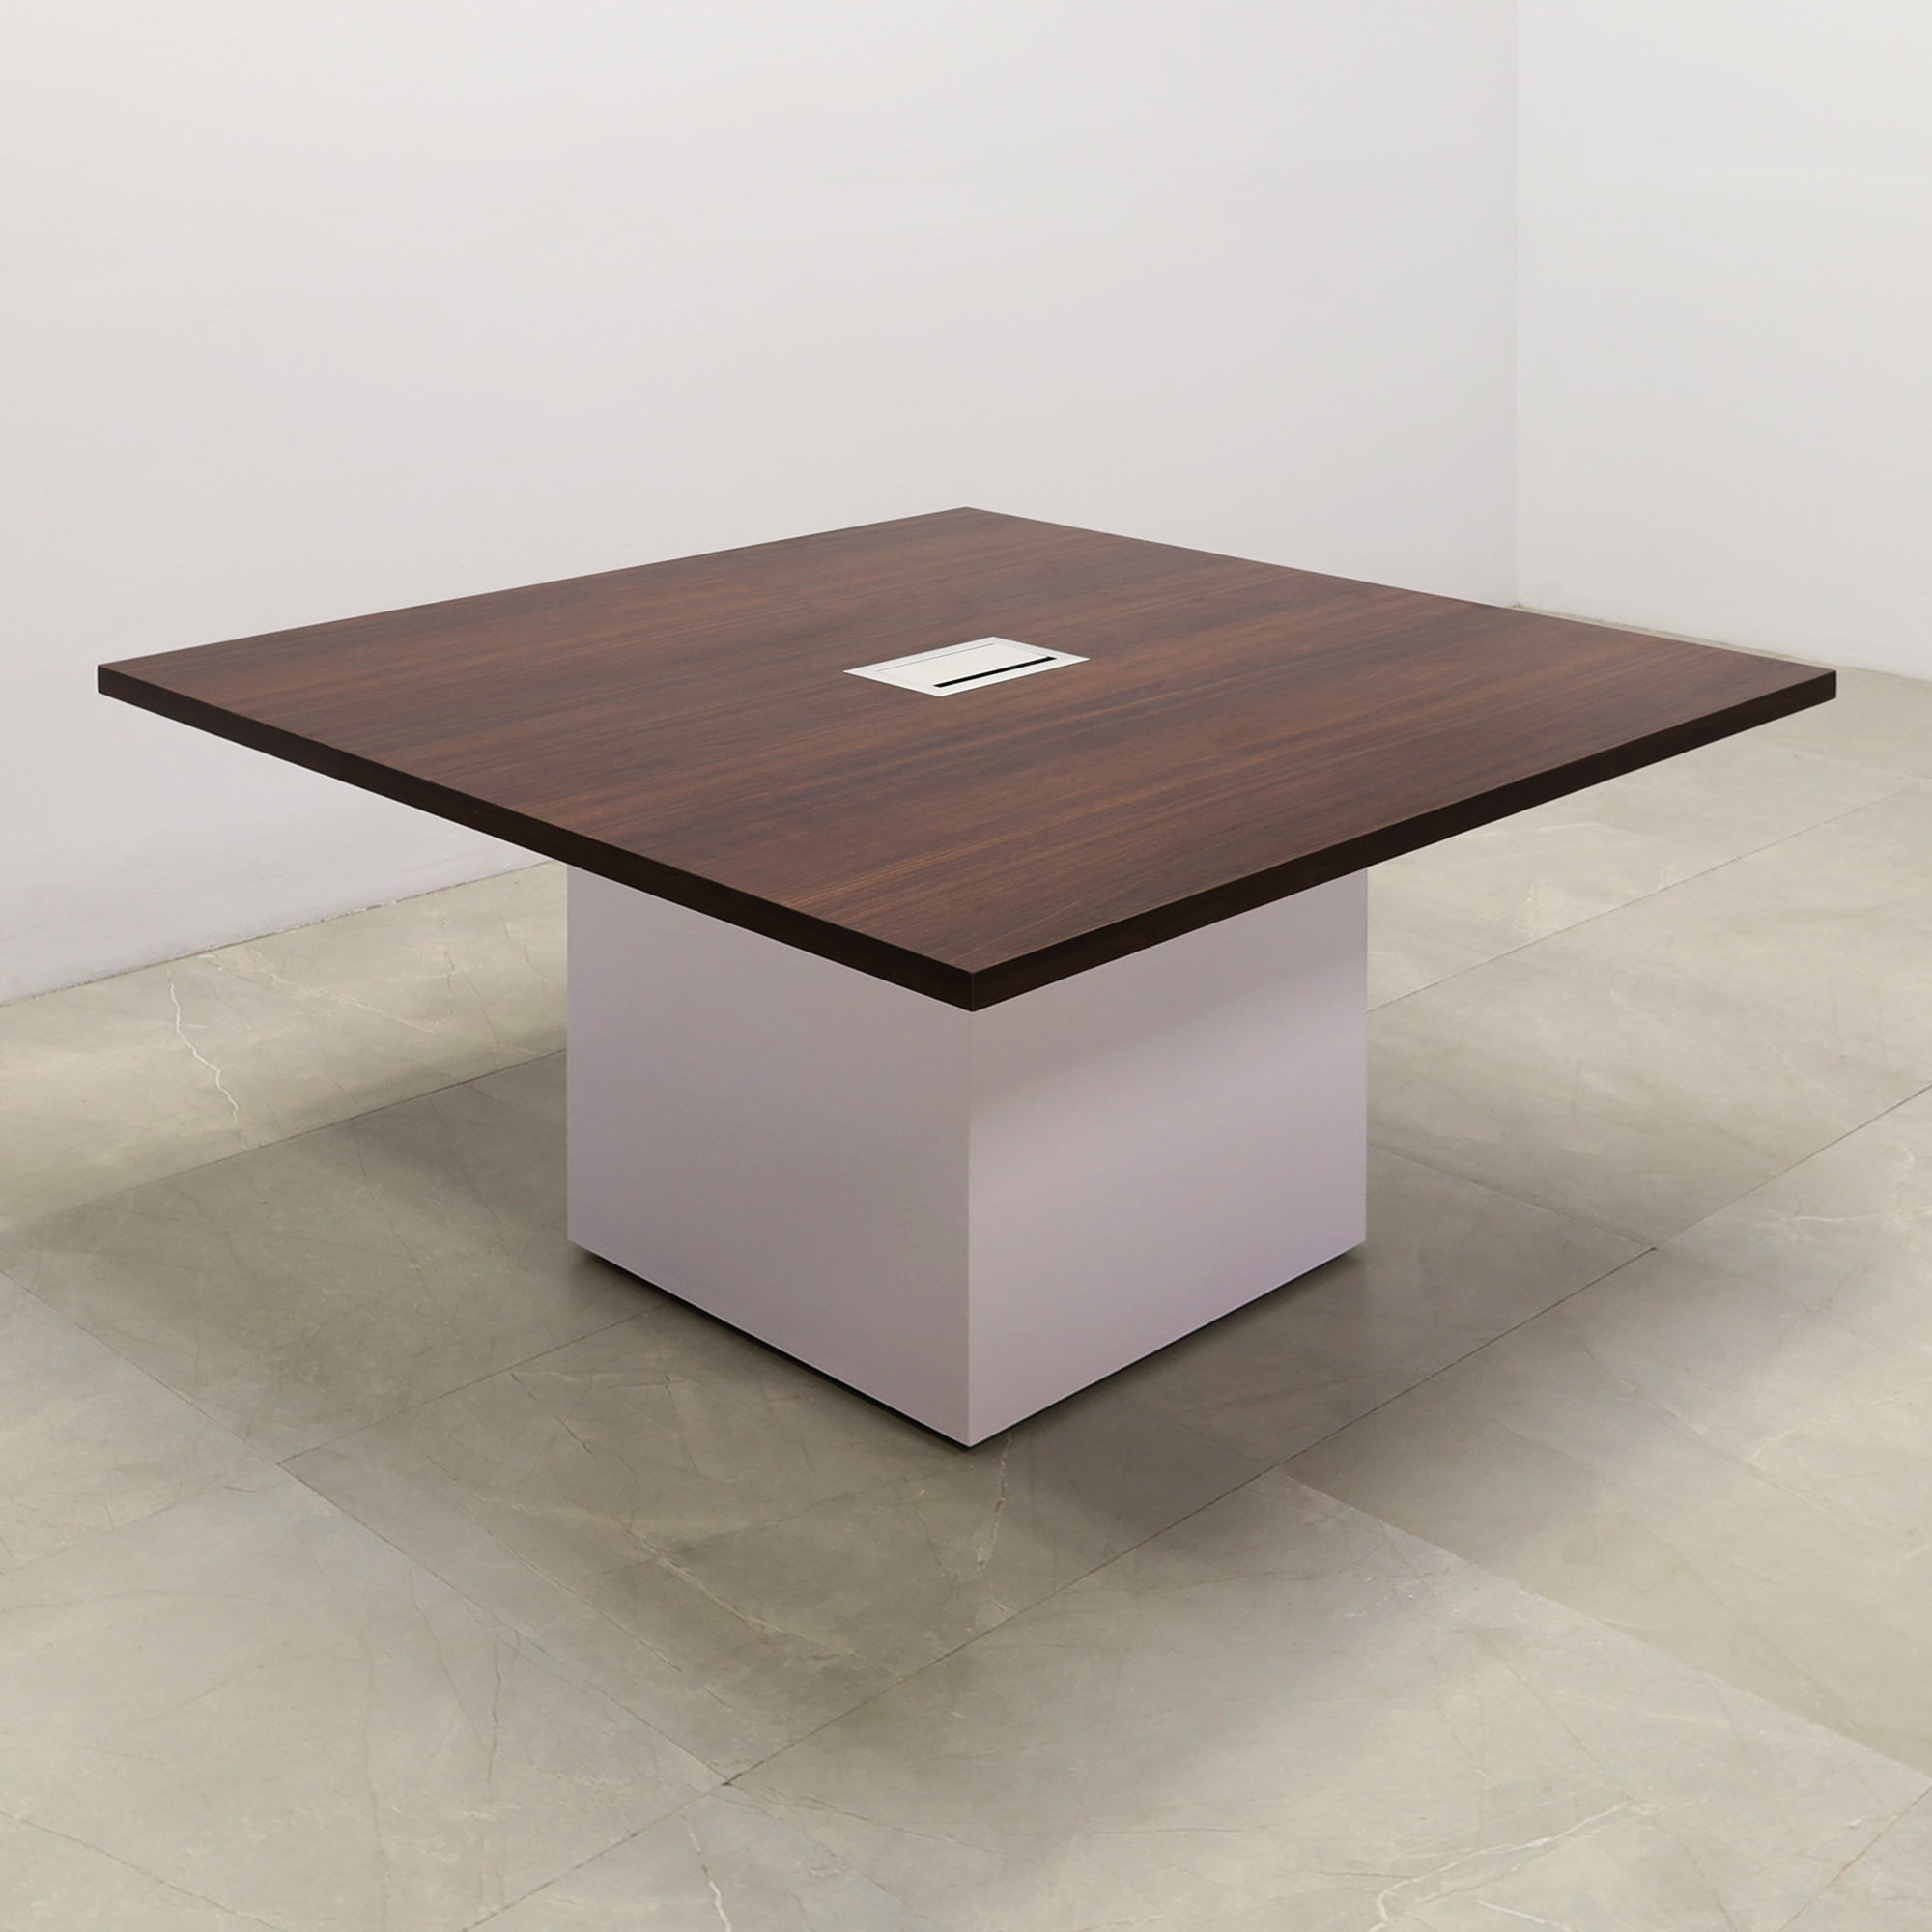 48-inch Newton Square Conference Table With Laminate Top in colombian walnut matte laminate top and white gloss laminate base, with silver MX3 powerbox, shown here.